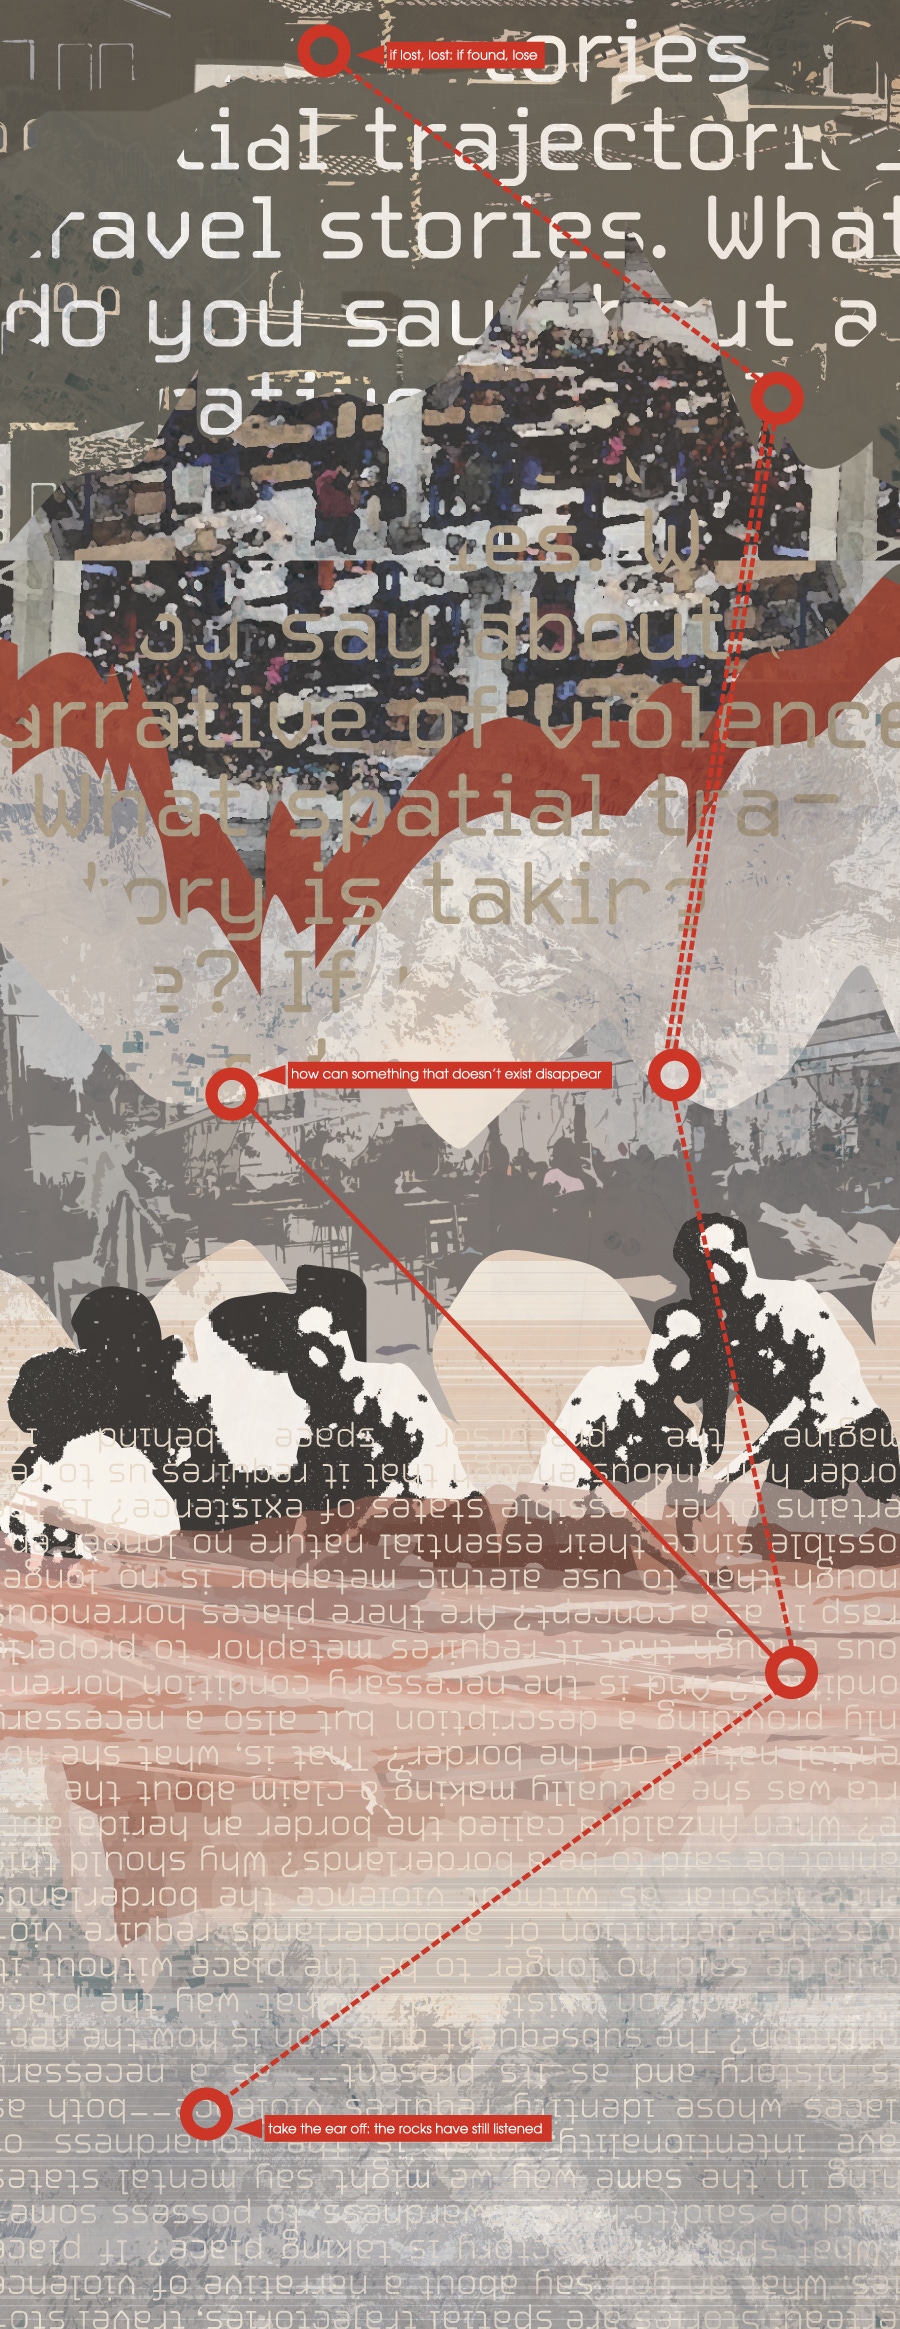 This poem is a digital collage.  Abstracted images of people and places intersect with partially obscured phrases from a wider text.  Overlaid on the whole, a route, like a map, shows the key stops along the way: &quot;if lost, lost: if found, lose&quot;; &quot;how can something that doesn&rsquo;t exist disappear&quot;; &quot;take the ear off: the rocks have still listened&quot; - a sequence of crime, denial, and witness.